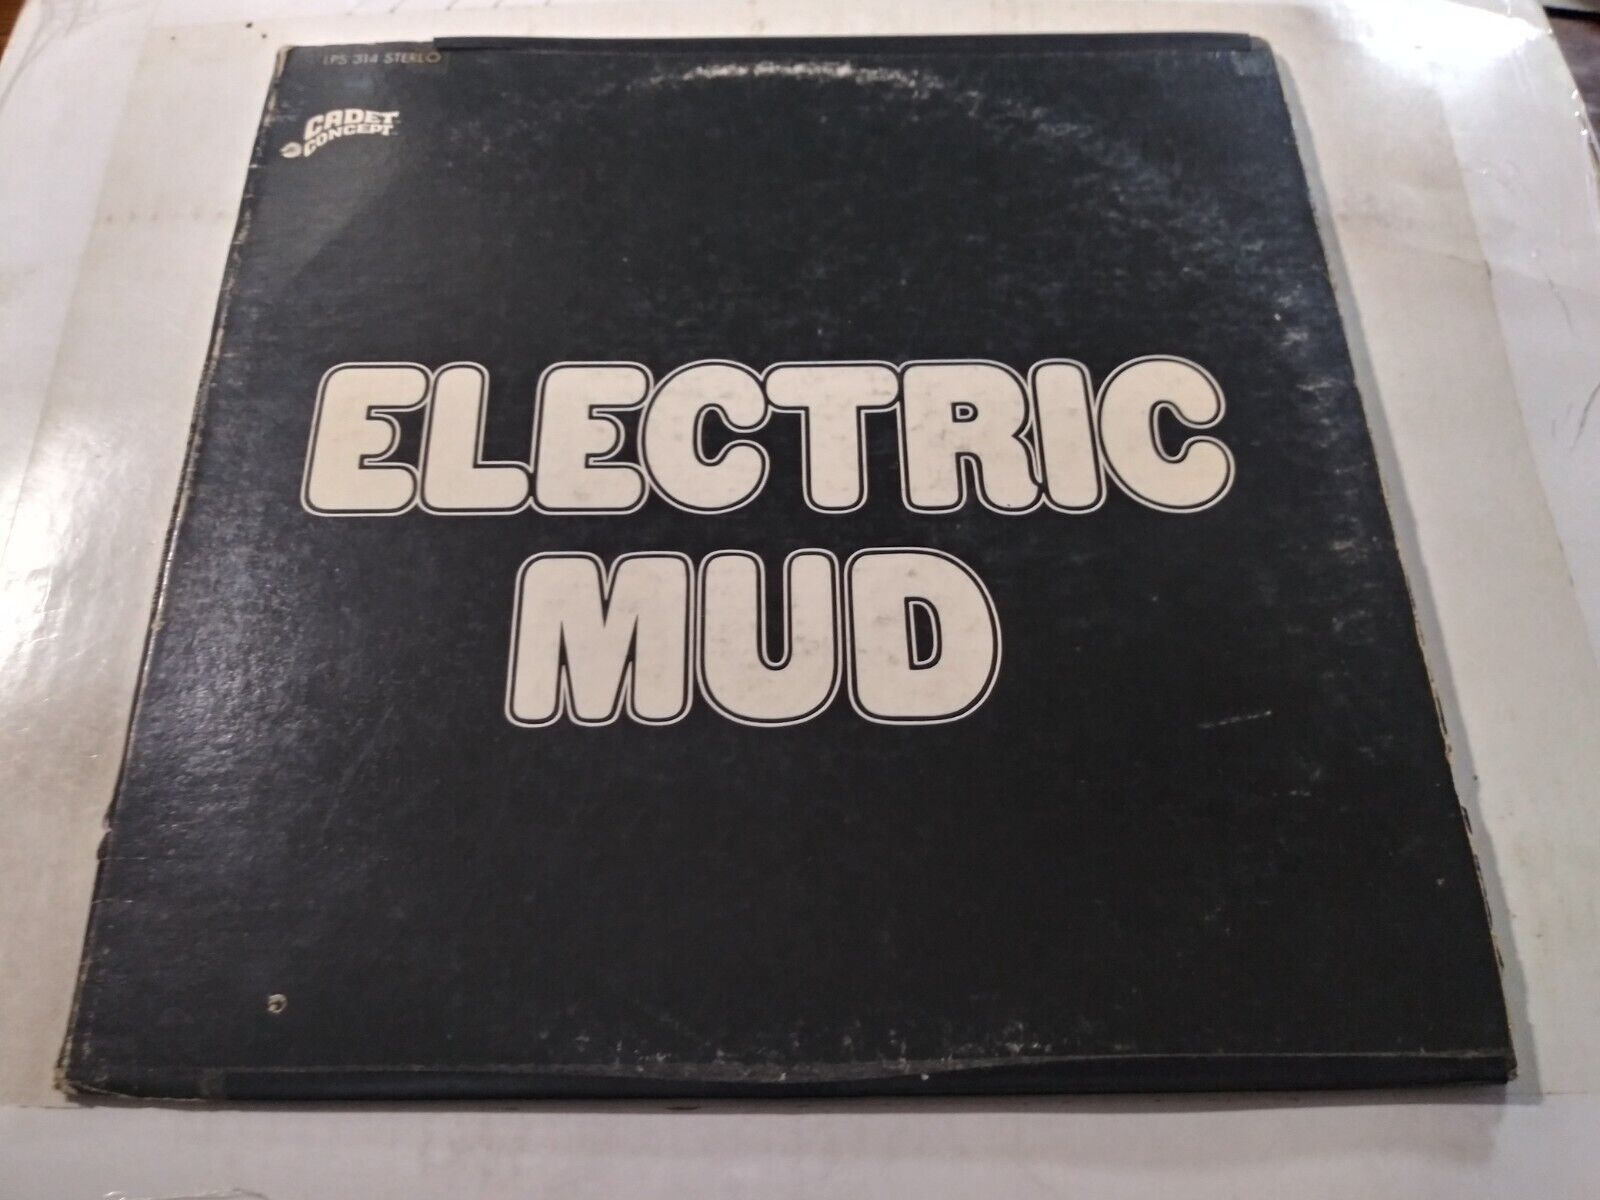 Muddy Waters – Electric Mud VG- Original Cadet Concept LPS314 Record 1969 BLUES